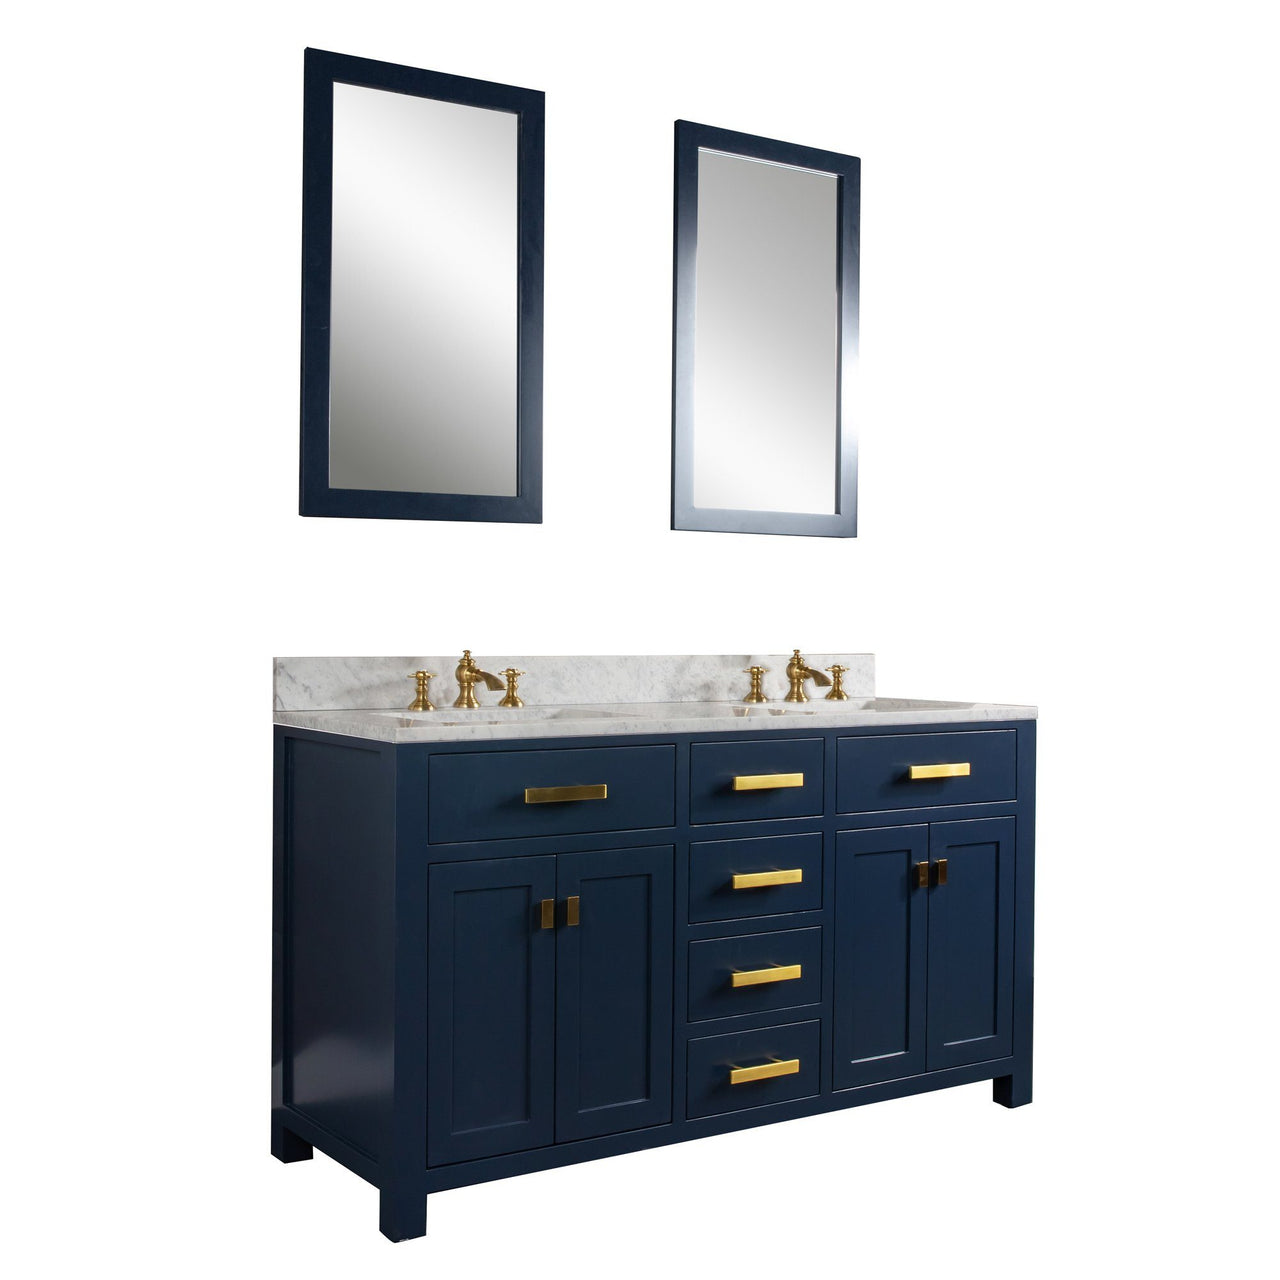 Madison 60-Inch Double Sink Carrara White Marble Vanity In Monarch BlueWith F2-0013-06-FX Lavatory Faucet(s) Vanity Water Creation 